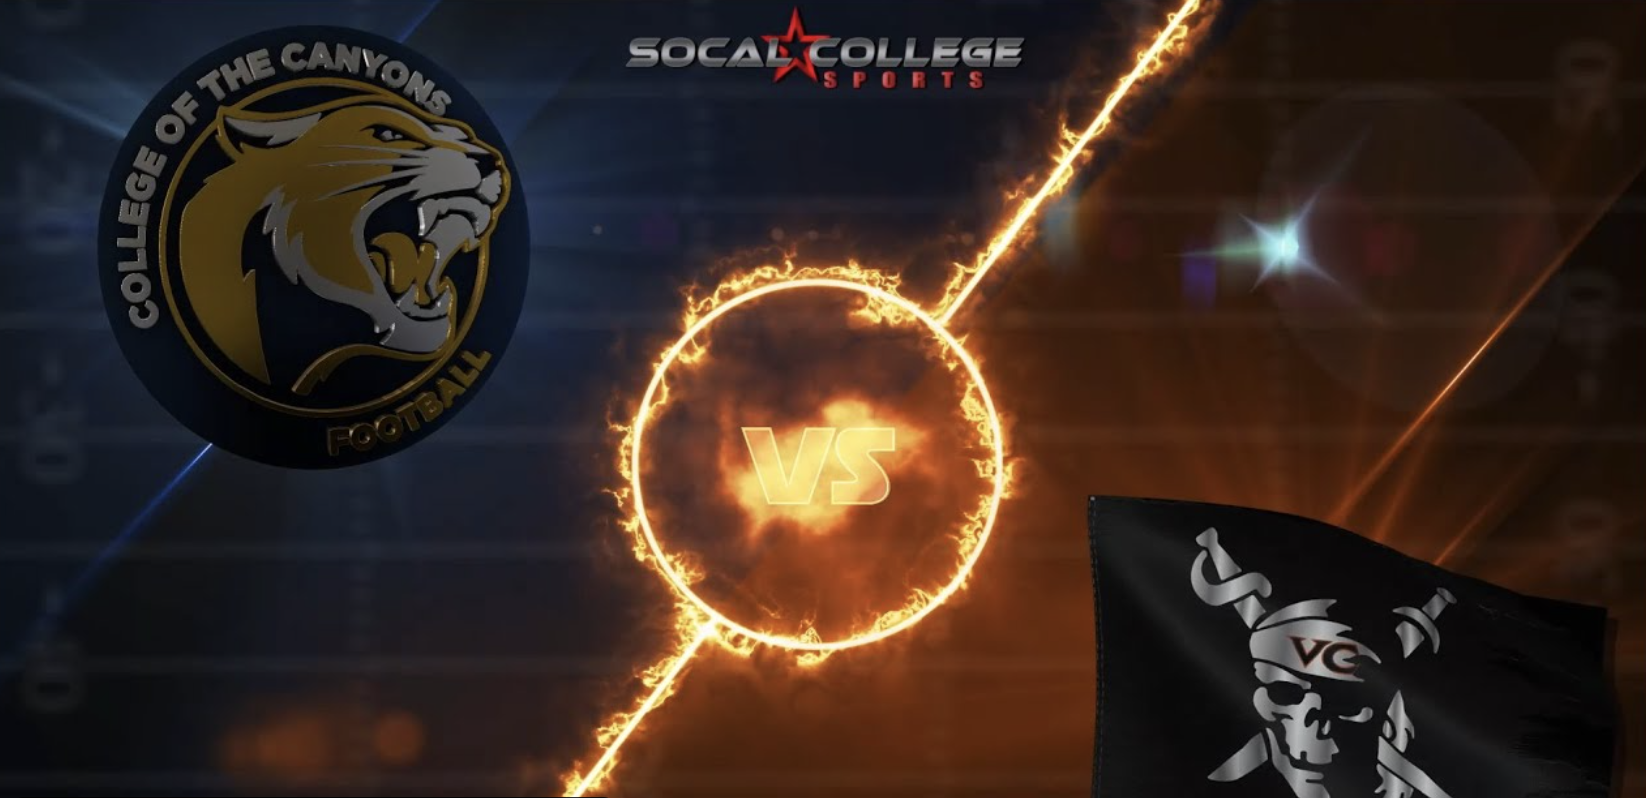 College of the Canyons vs. Ventura College live stream promotional graphic.